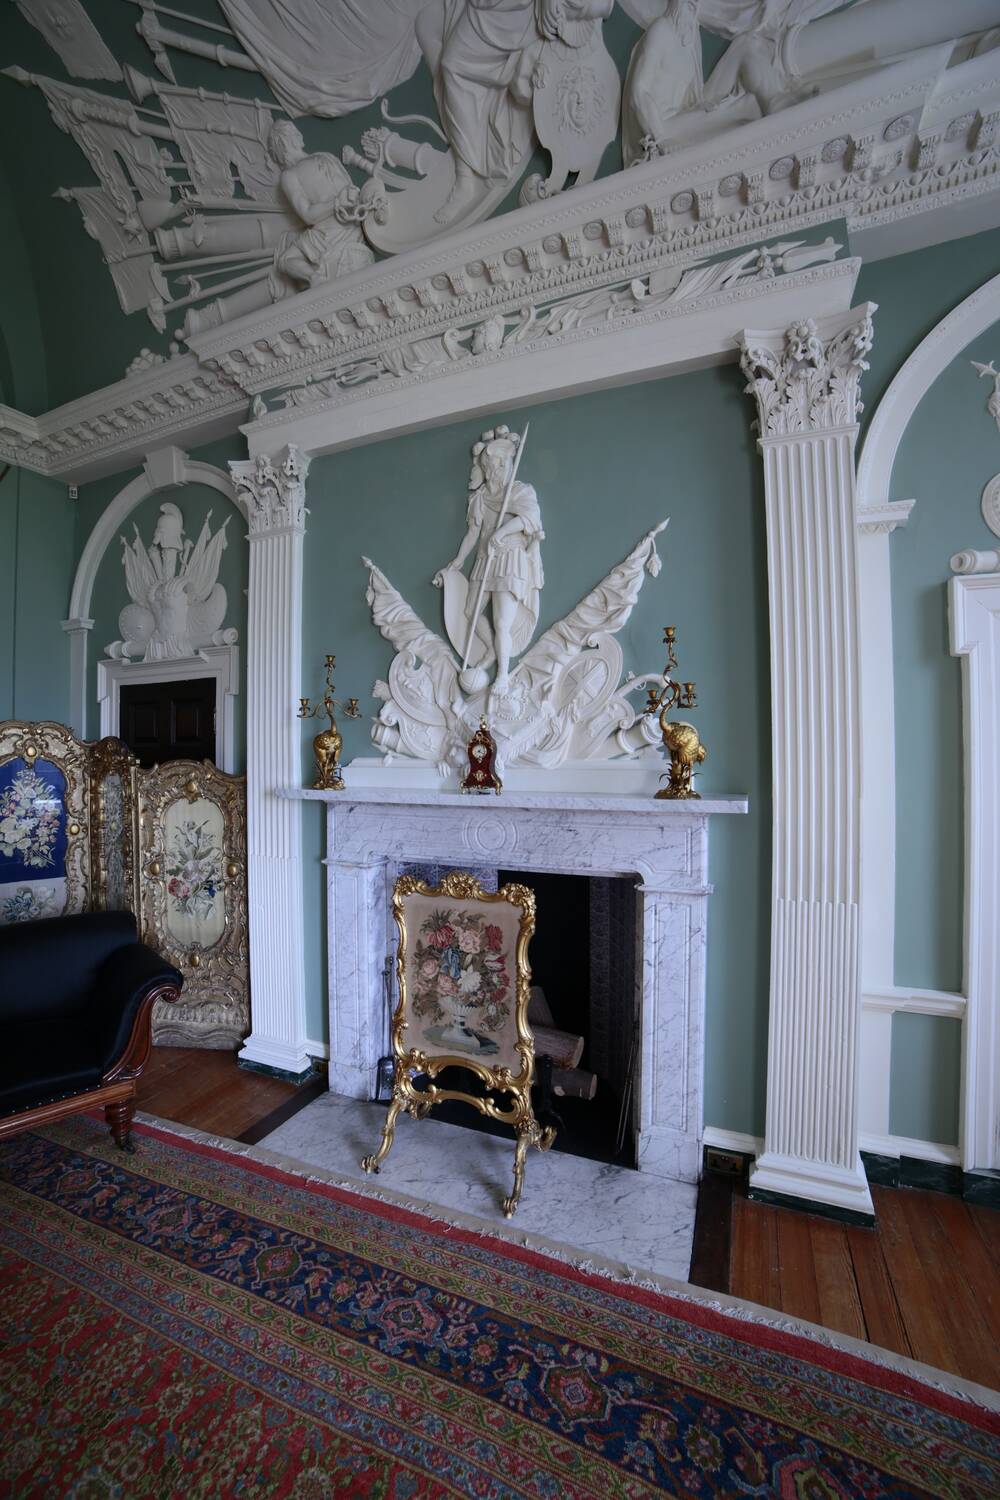 A view of elaborately carved plasterwork on teal-blue walls in a grand drawing room in a country house. The panel above the fireplace features Mars with one foot resting upon a round crown. The plaster design continues onto the ceiling, where more classical scenes can be seen. An embroidered fireguard stands on the fireplace.